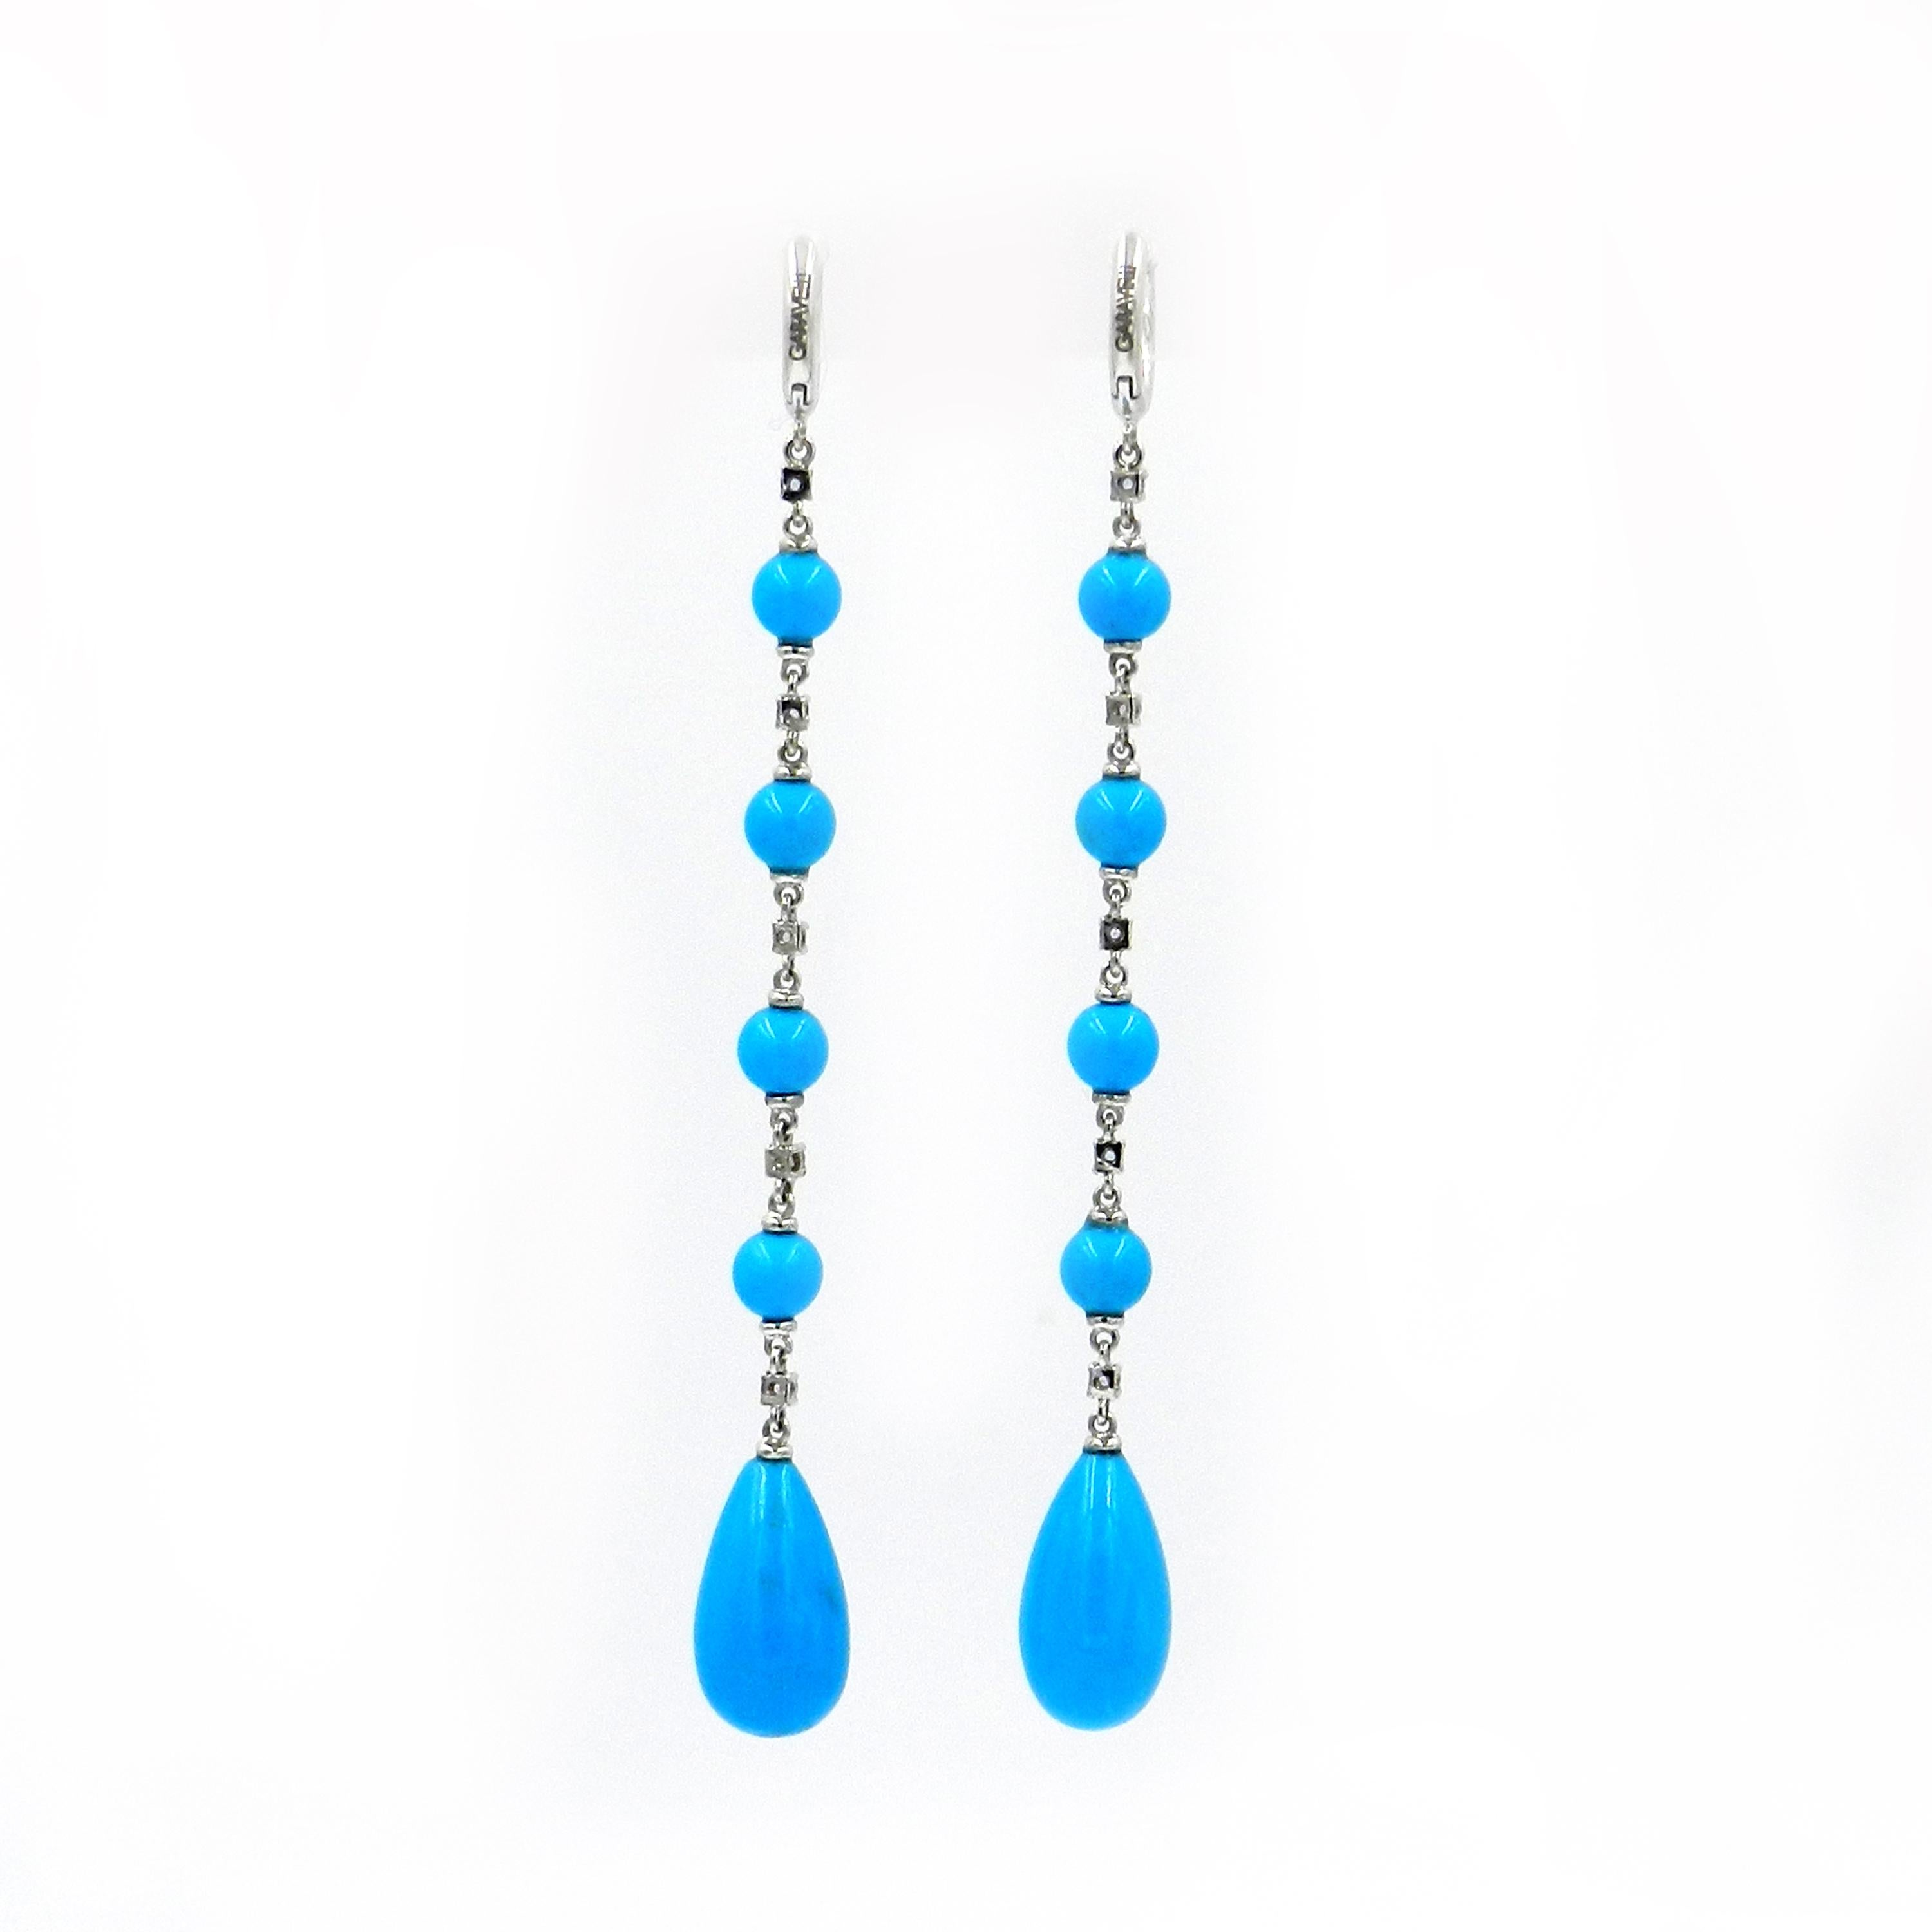 Contemporary 18 Karat Gold Diamonds, Blue Sapphires and Turquoise Garavelli Long Earrings